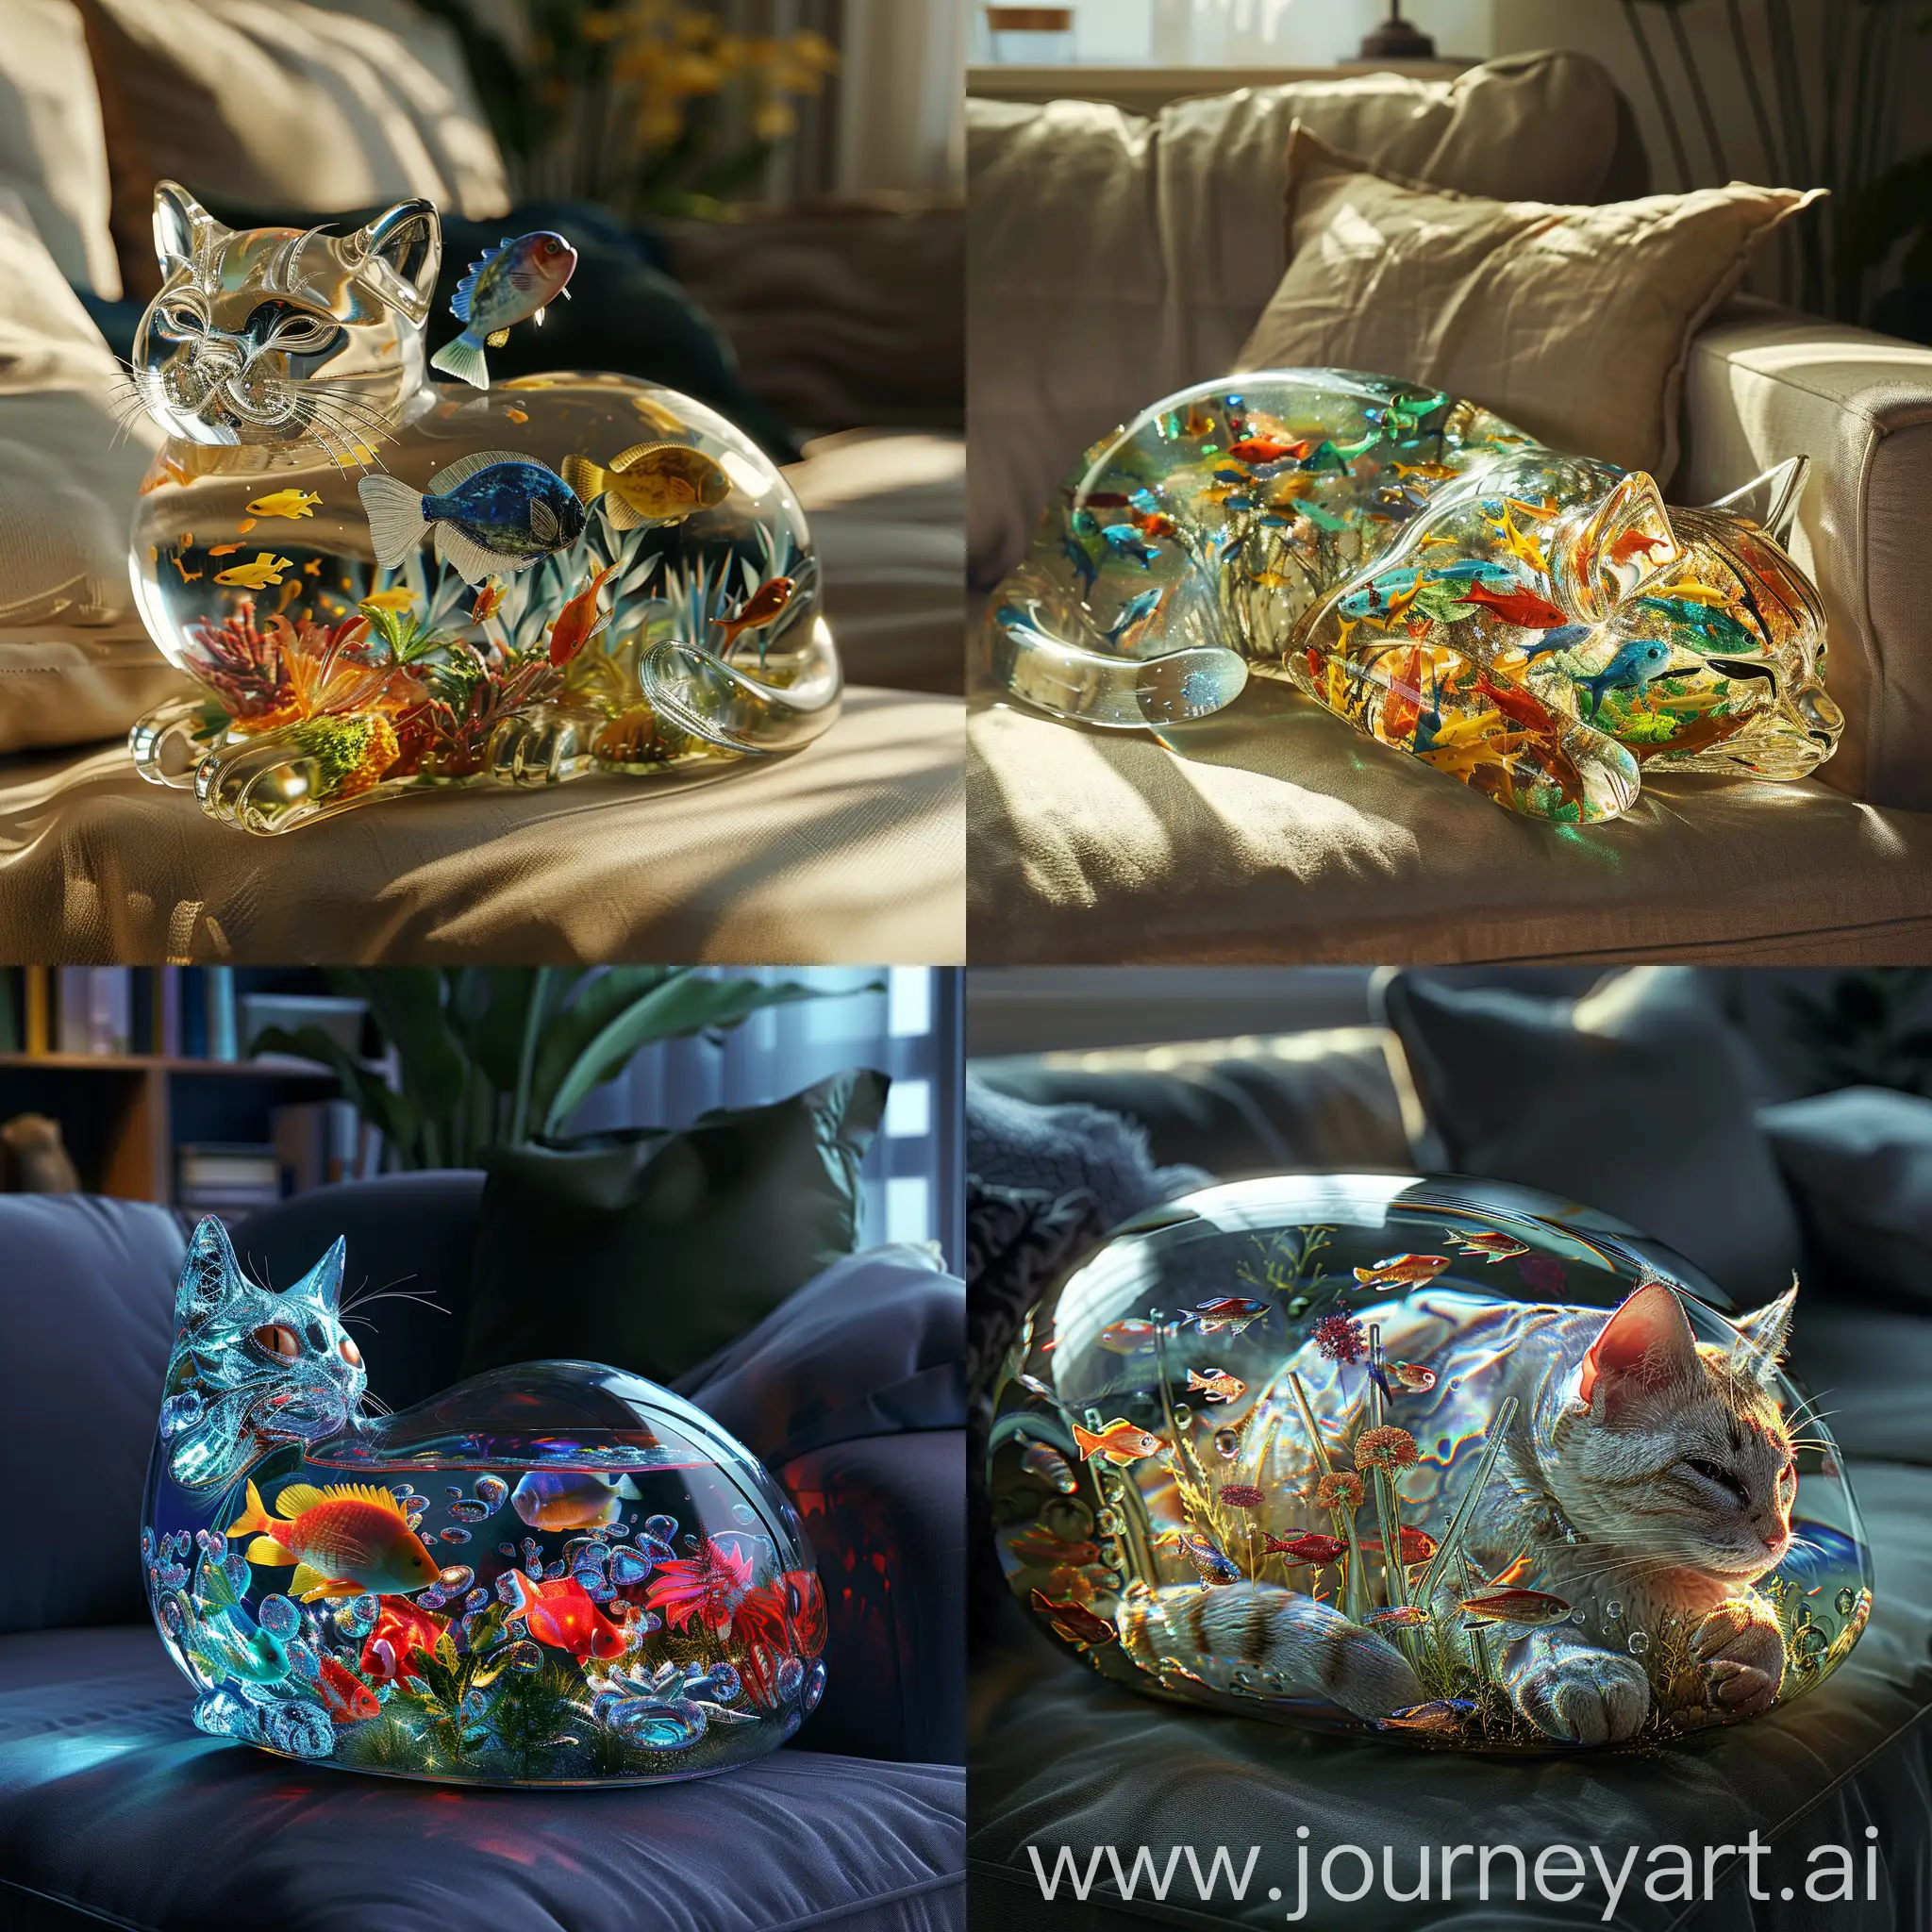 Glass-Cat-Sculpture-with-Tropical-Fish-Resting-on-Couch